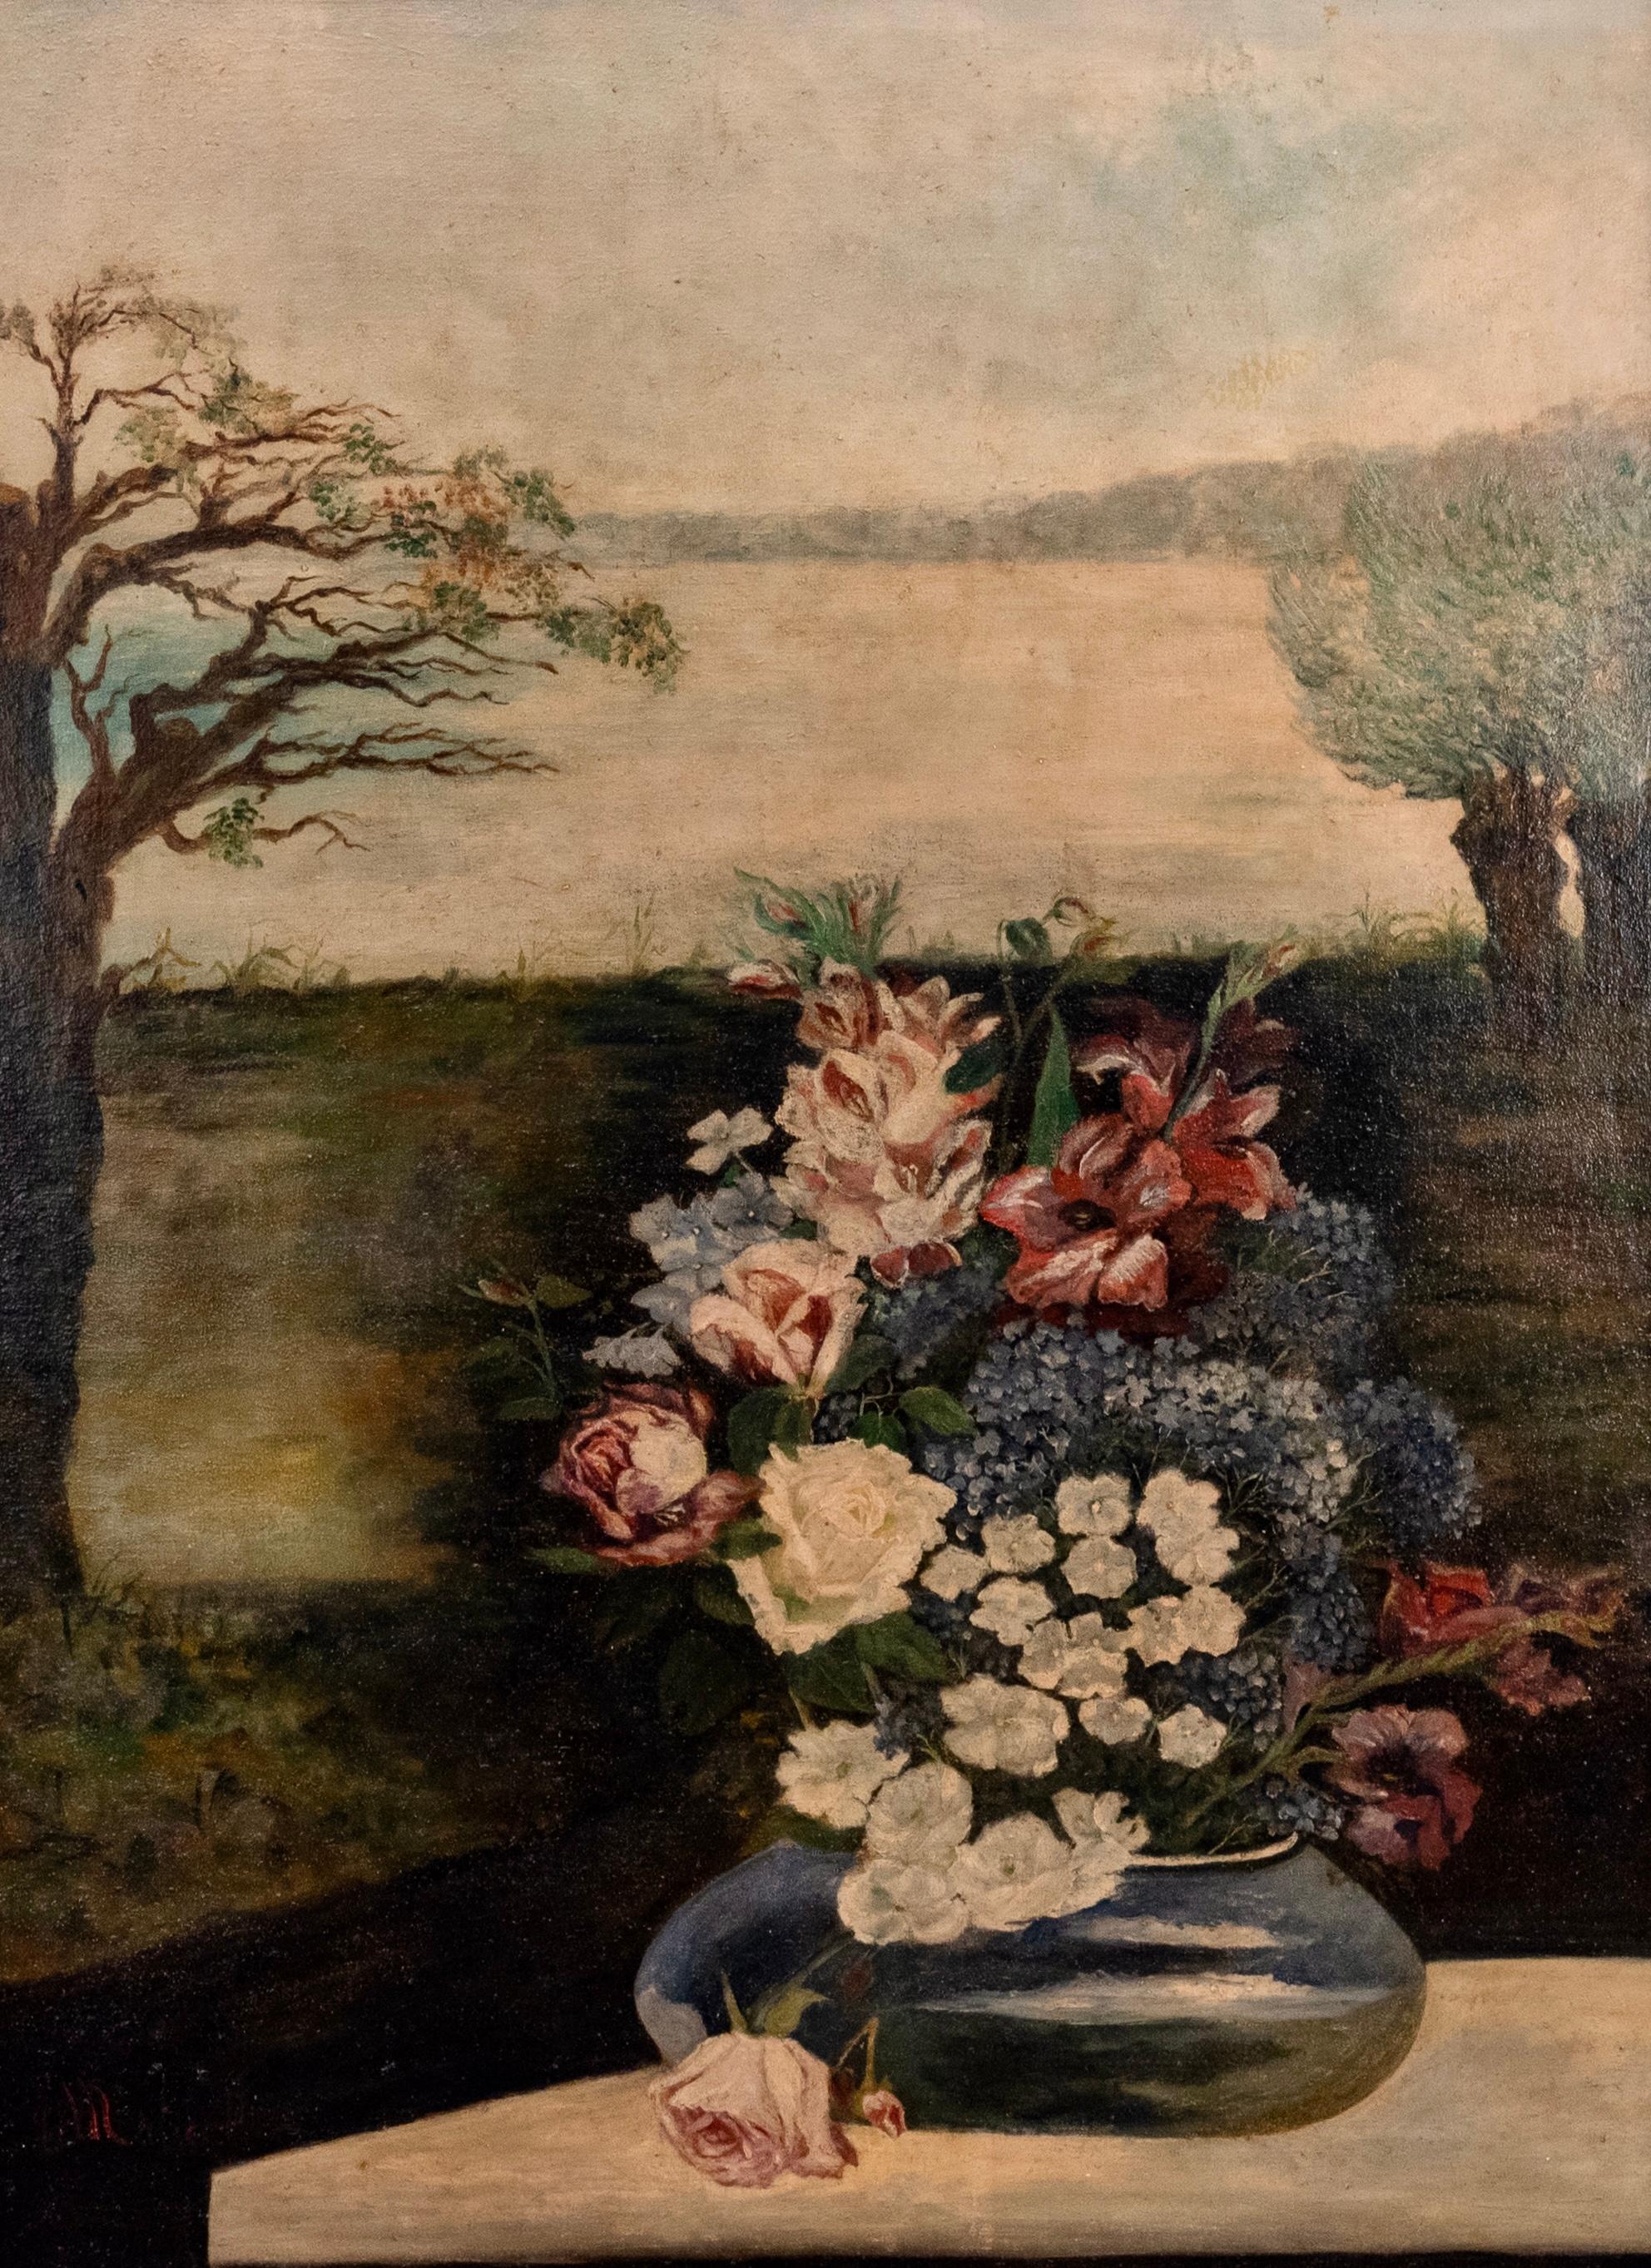 Still life with vase of flowers and landscape
Impressive impressionist painting in perfect condition 
Housed in a gilded wooden frame.

This artwork is shipped from Rome. Under existing legislation, any artwork in Italy created over 70 years ago by